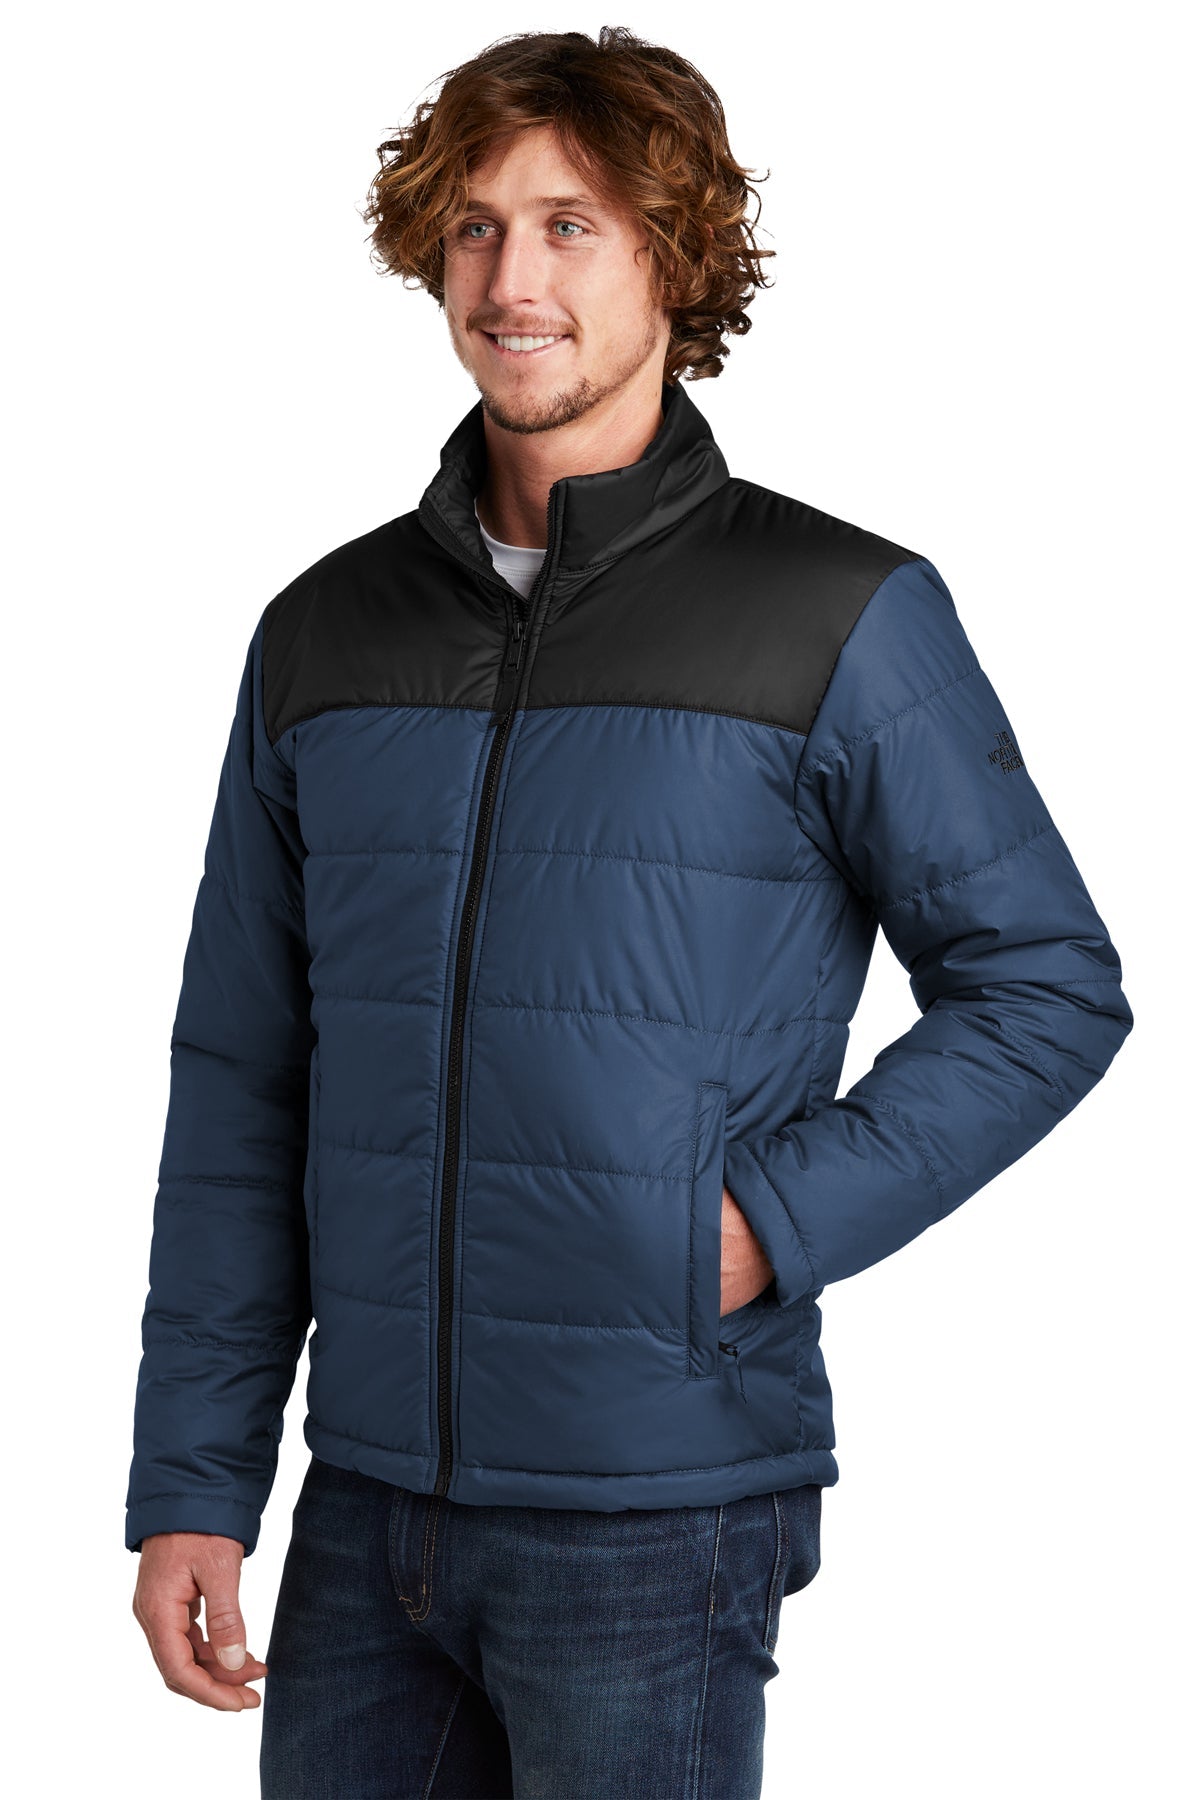 NF0A529K The North Face® Everyday Insulated Jacket